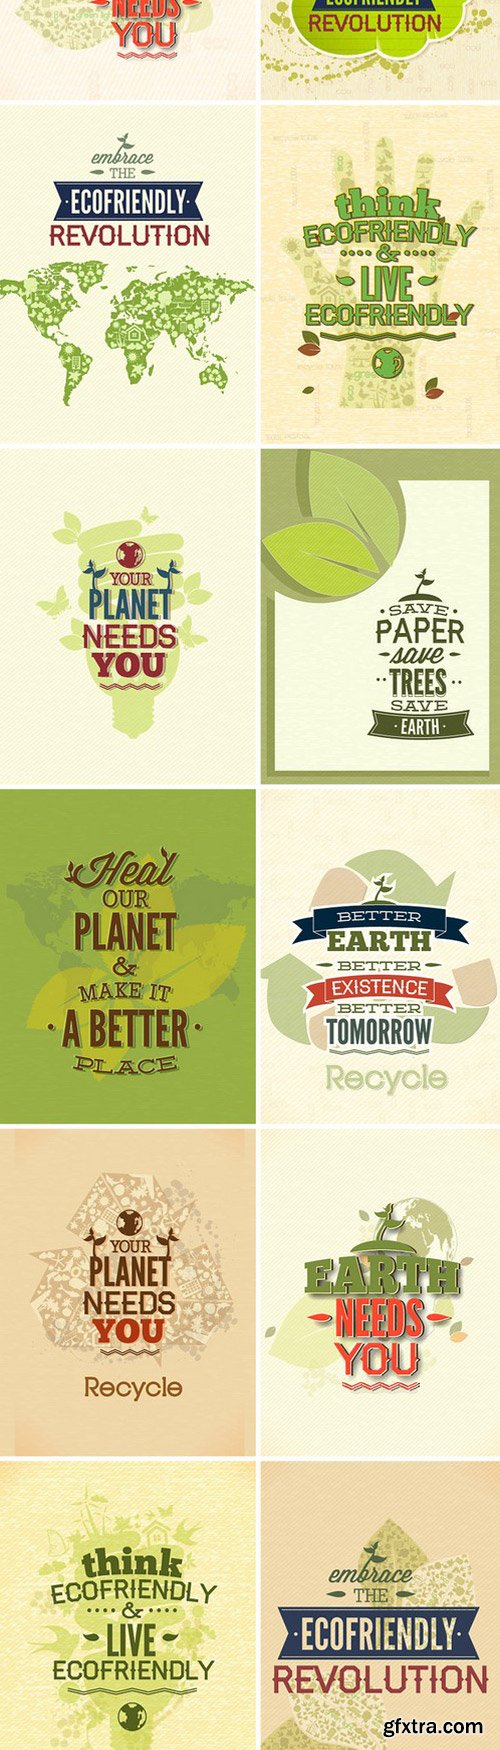 Eco And Organic Vector Illustrations